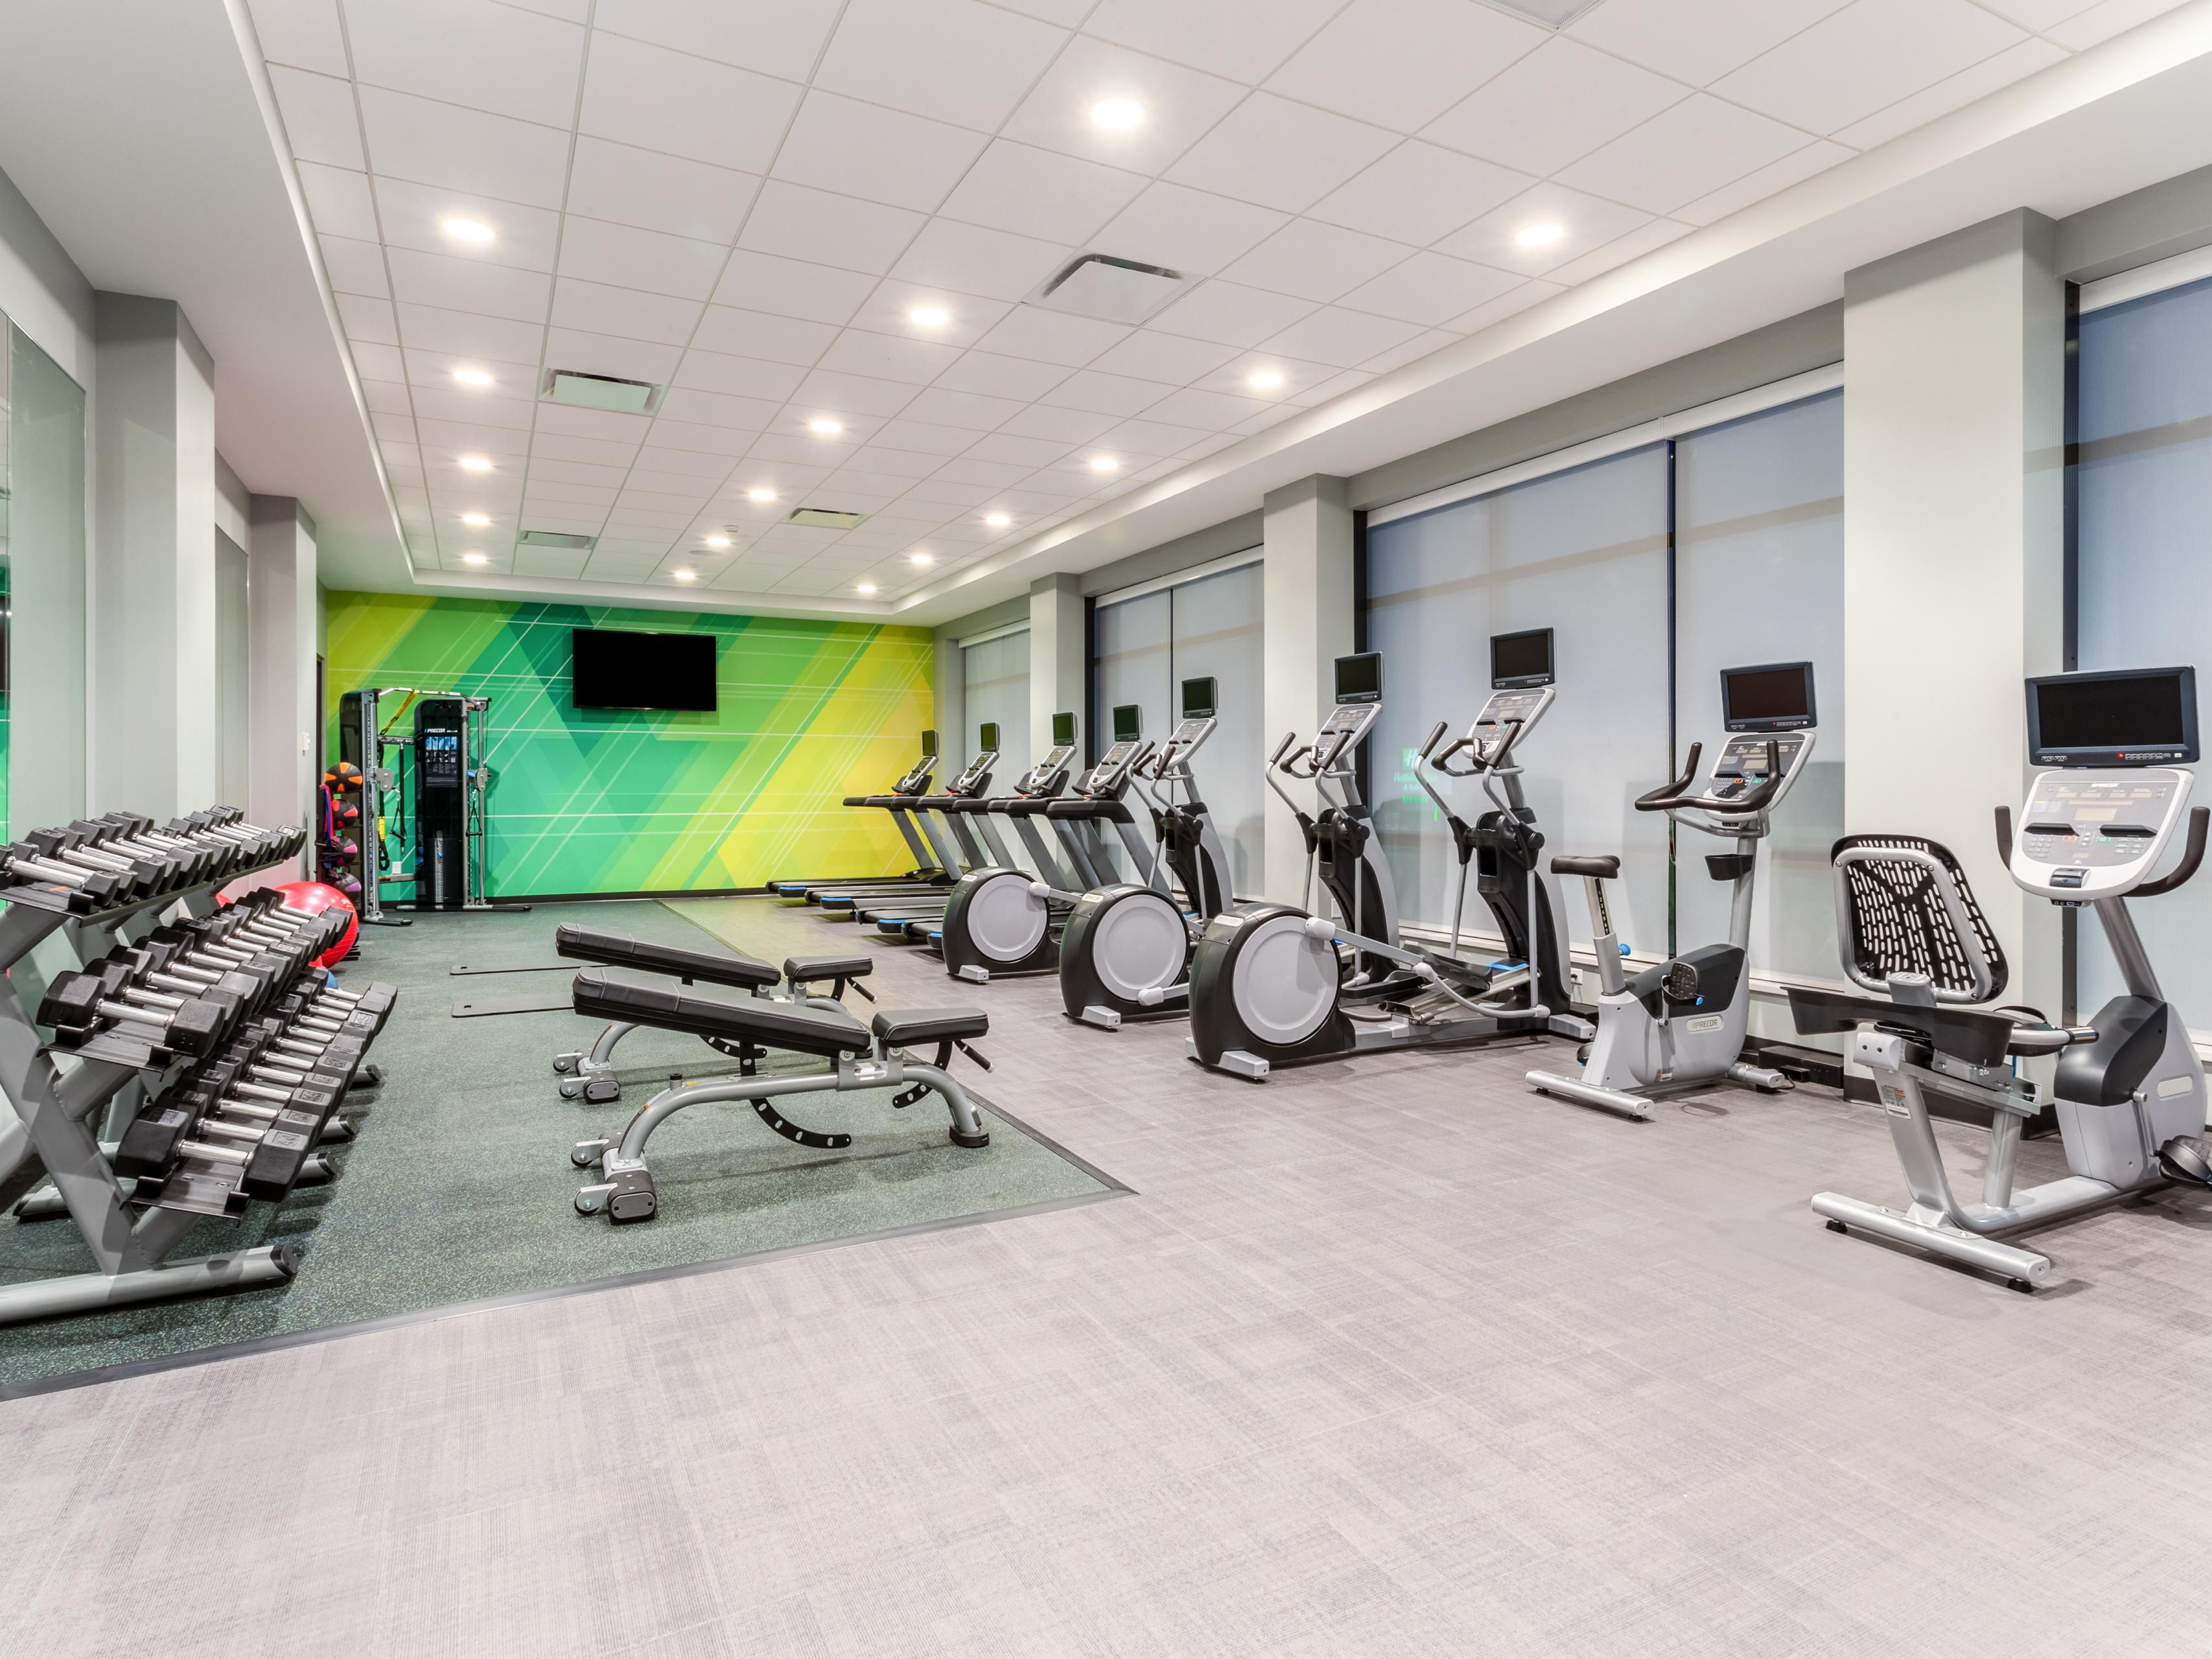 Our 24-hour state-of-the-art Fitness Center offers everything you need for an energizing workout. Enjoy cardio on our elliptical machines, stationary bikes, and treadmills. Or build and tone with free weights and bench, bands, and medicine balls. Whatever your style, you’ll fit in here. 